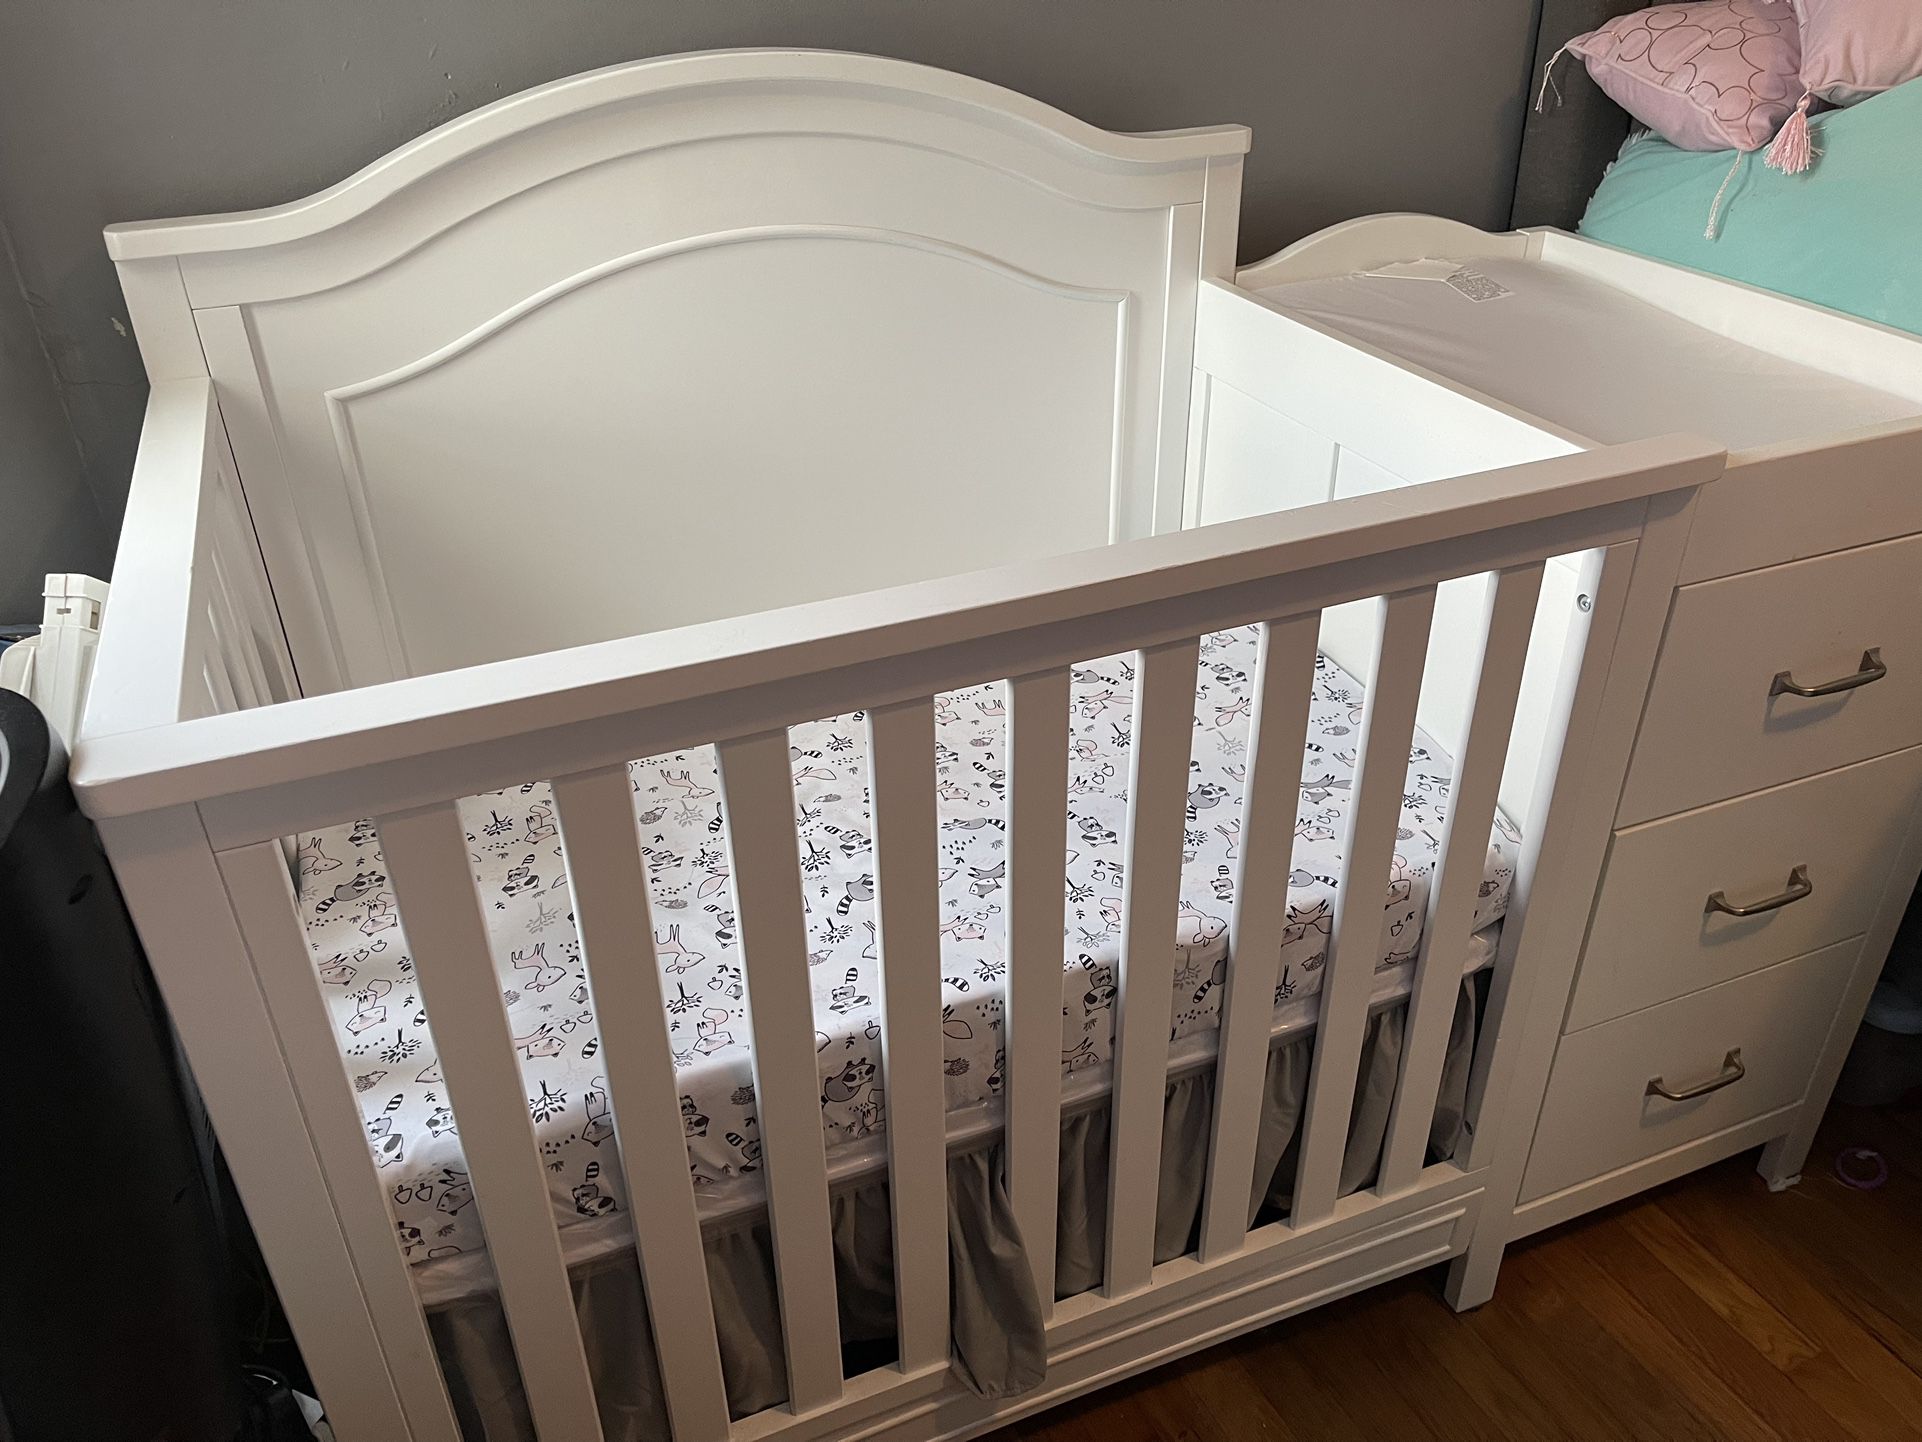 Mini Crib Convertible to Toddler Daybed and Changer with Storage